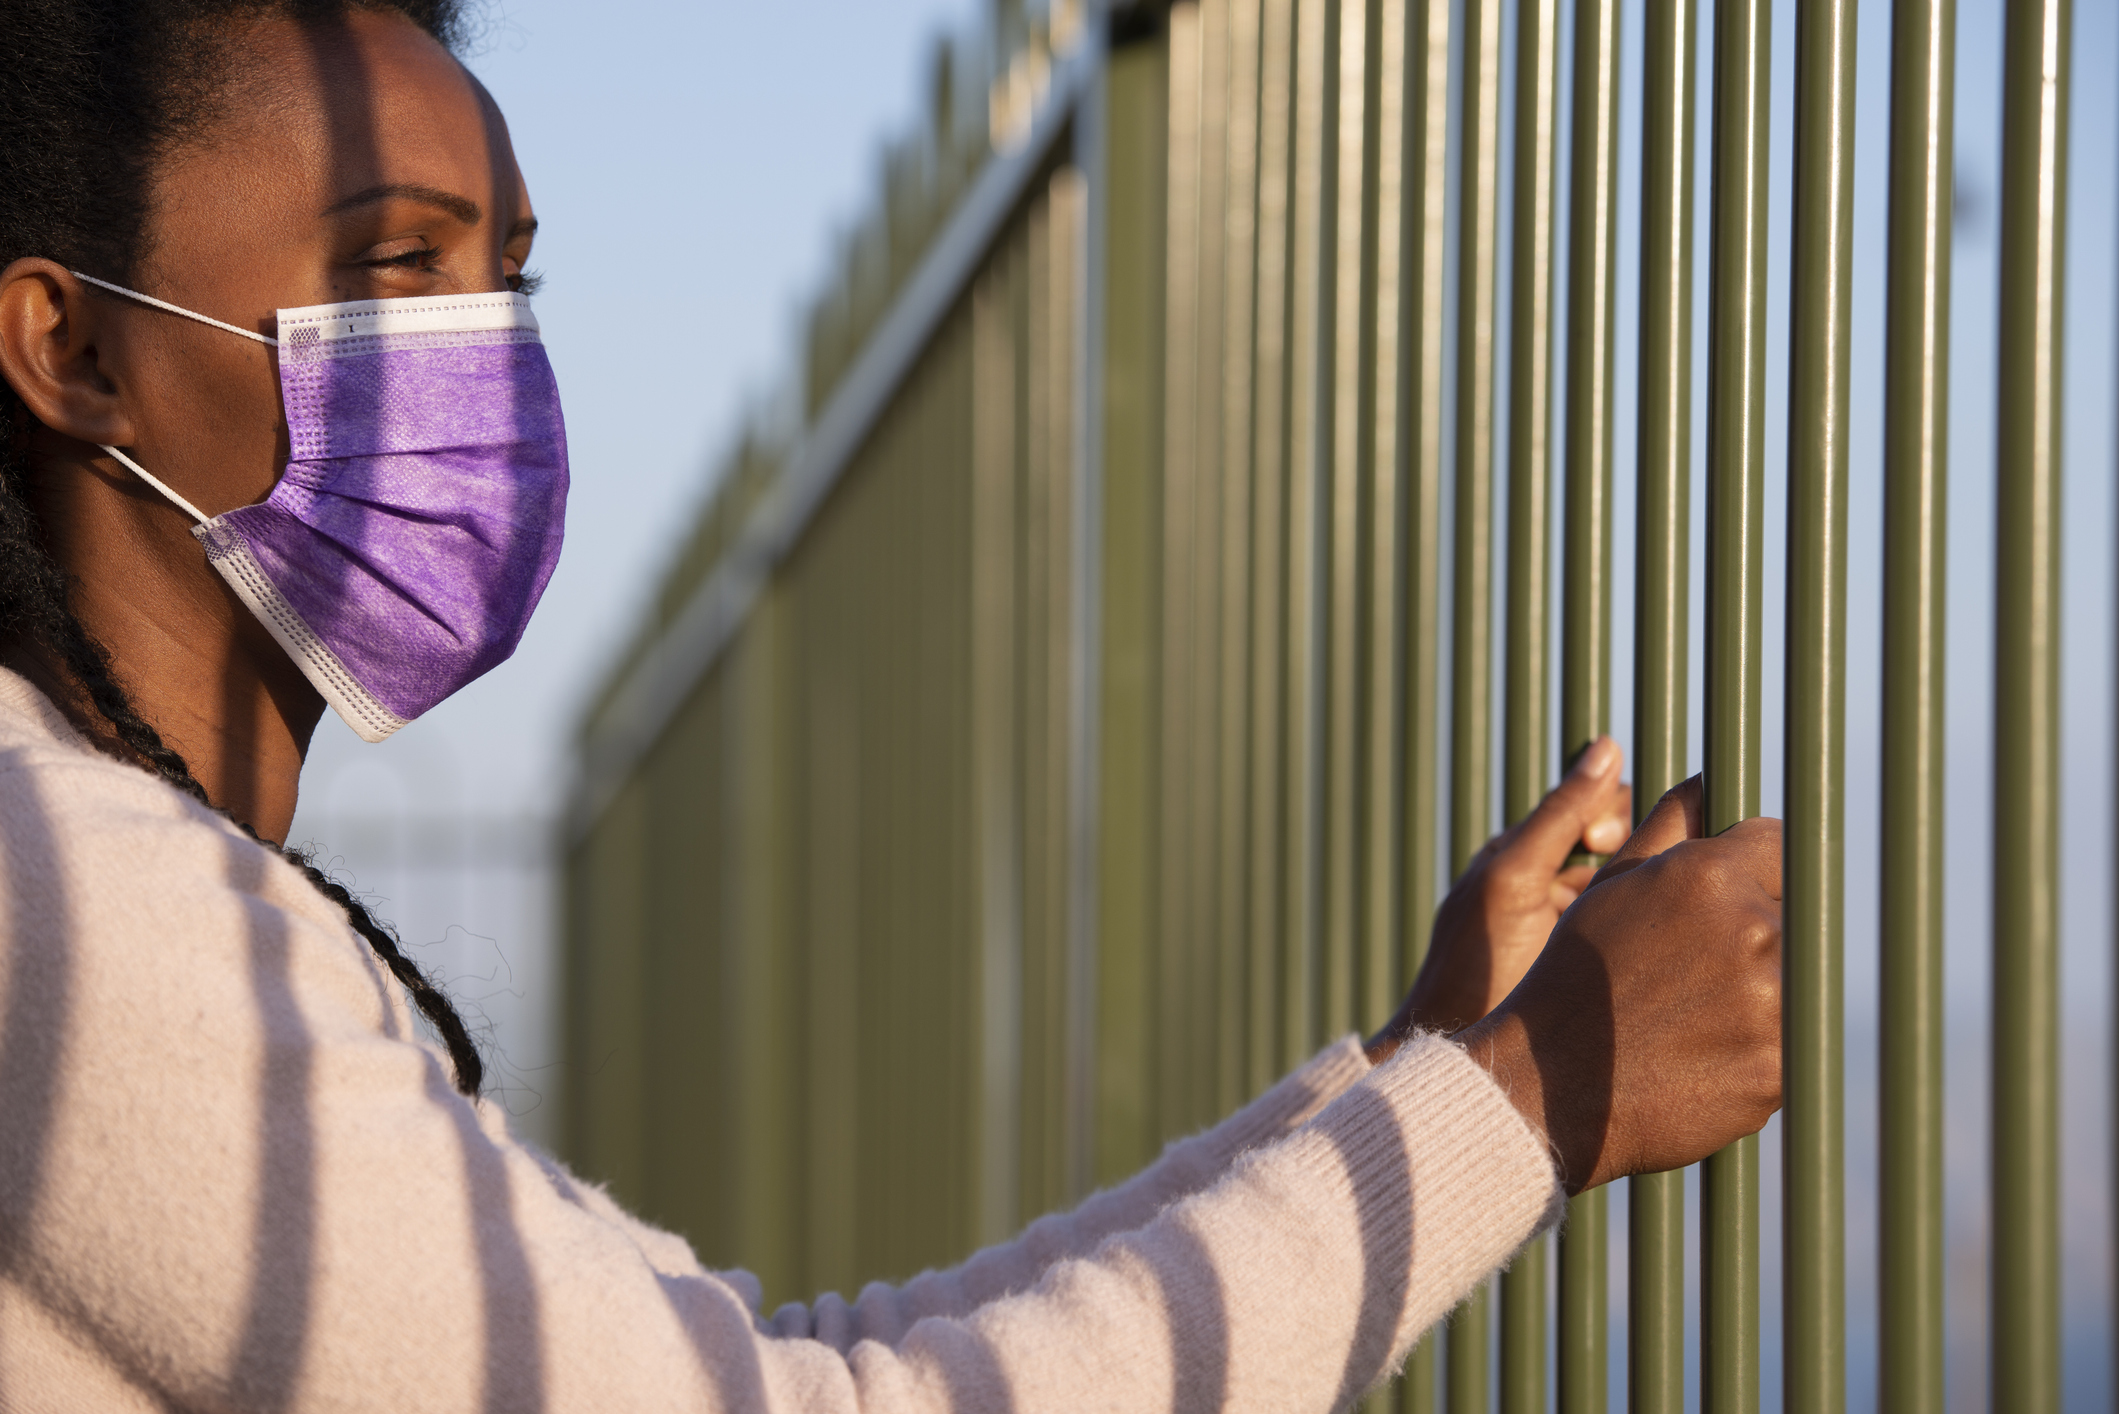 Black woman with mask behind bars